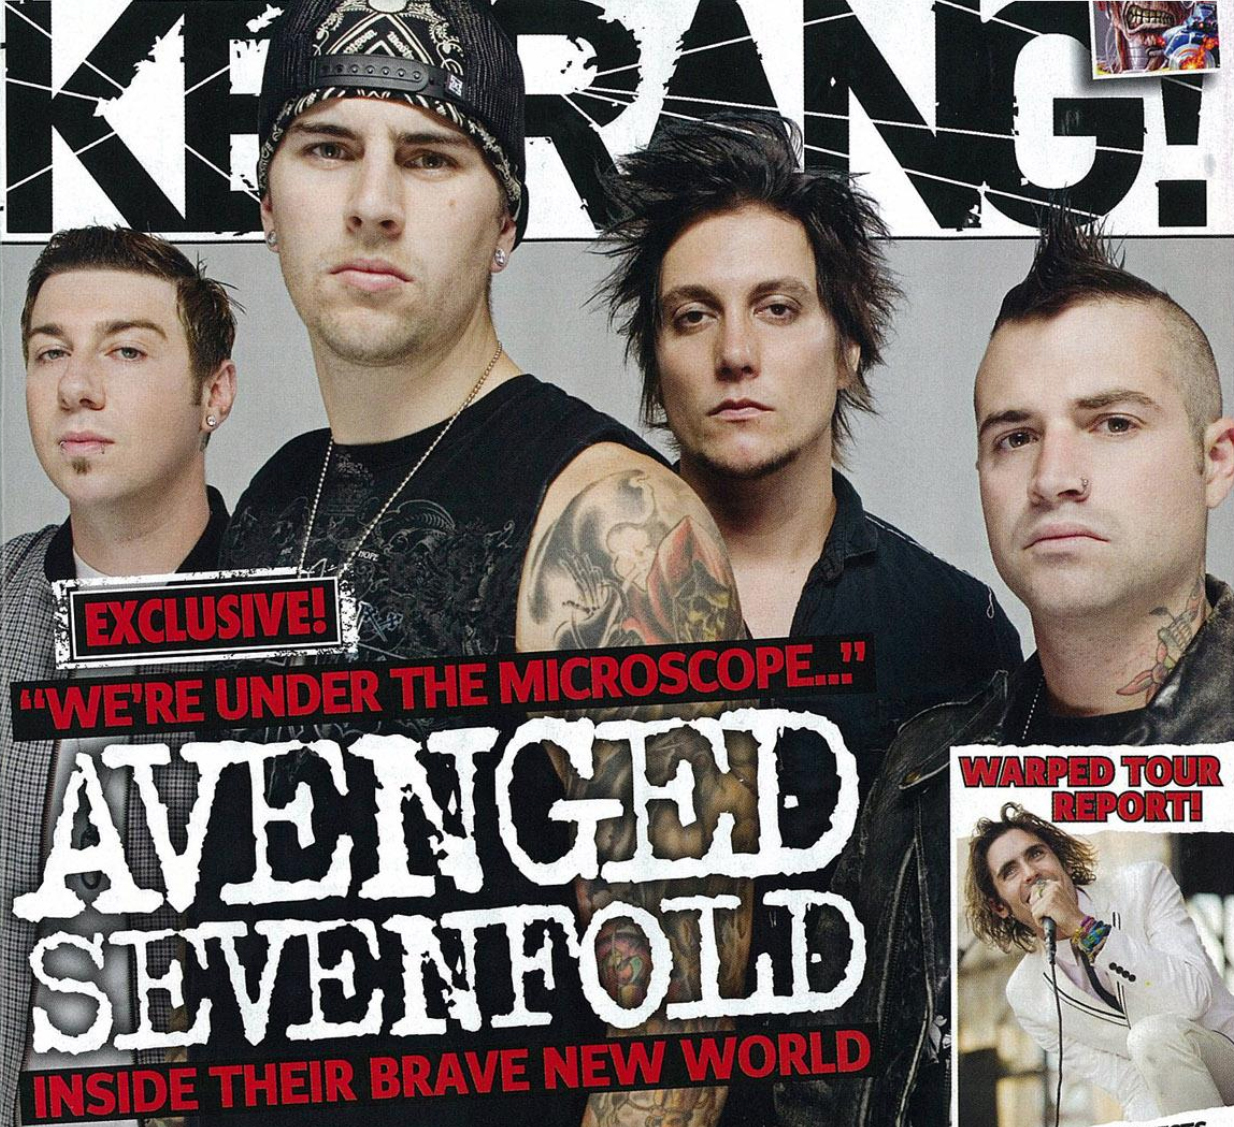 Avenged Sevenfold  Stories & Views From Inside The Pit